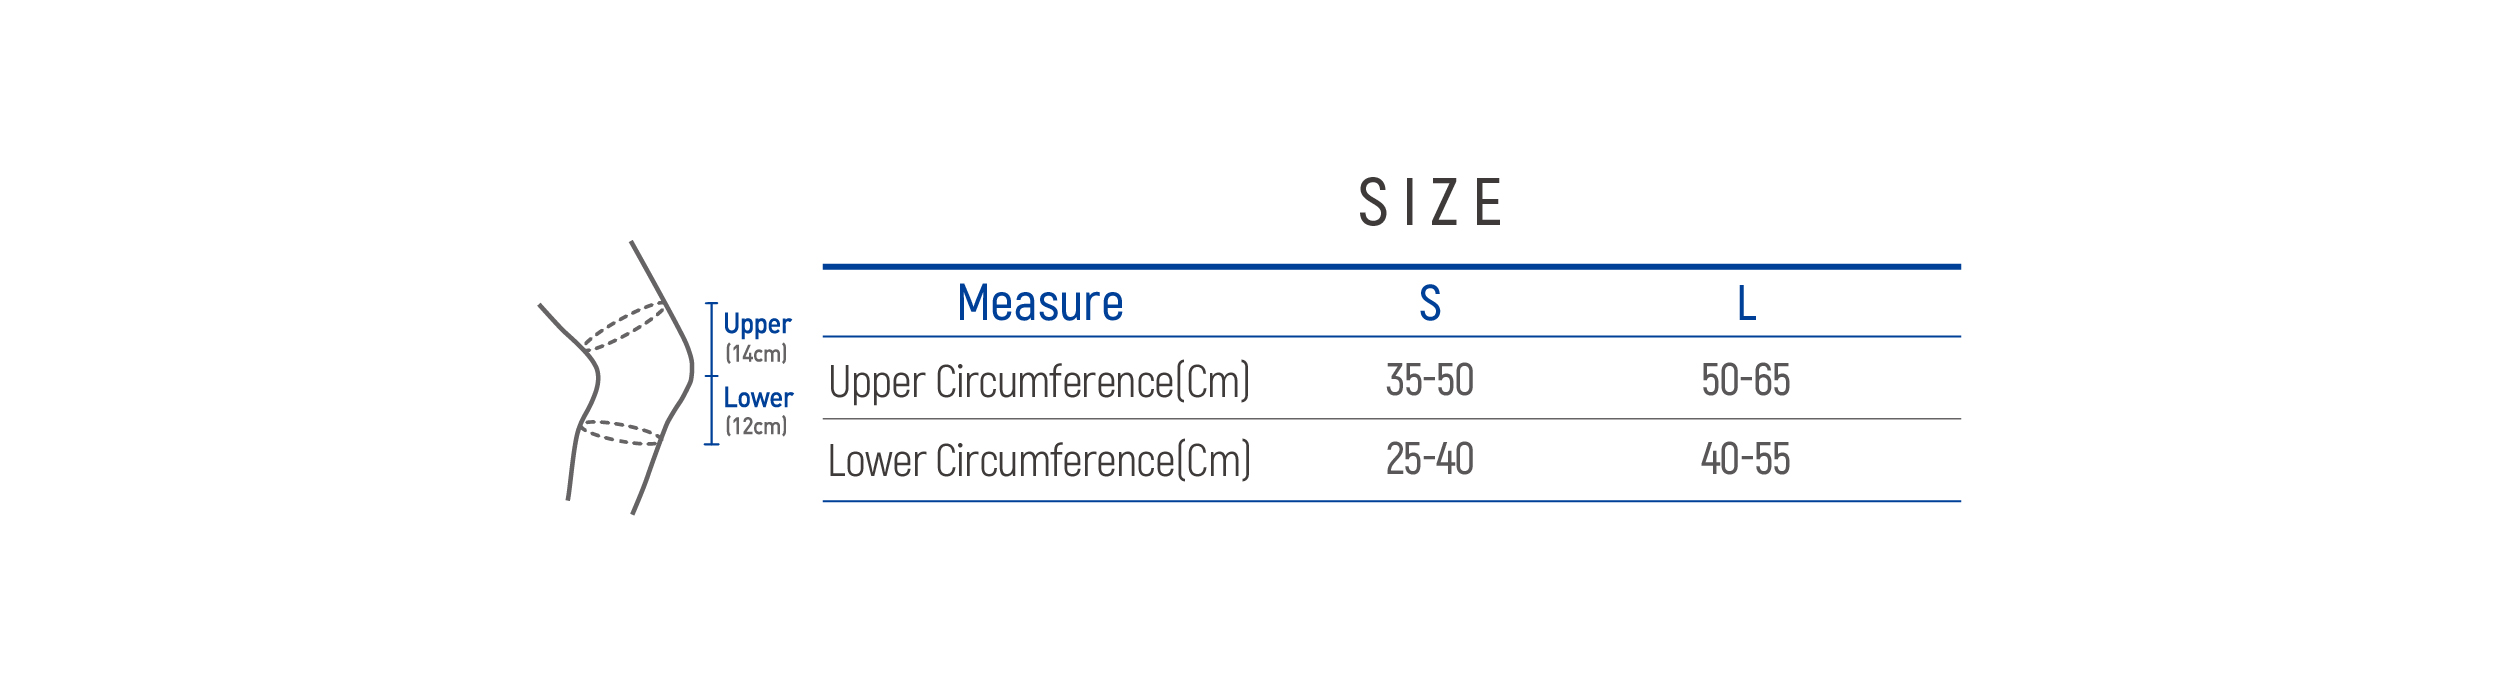 DR-K031 Size table image